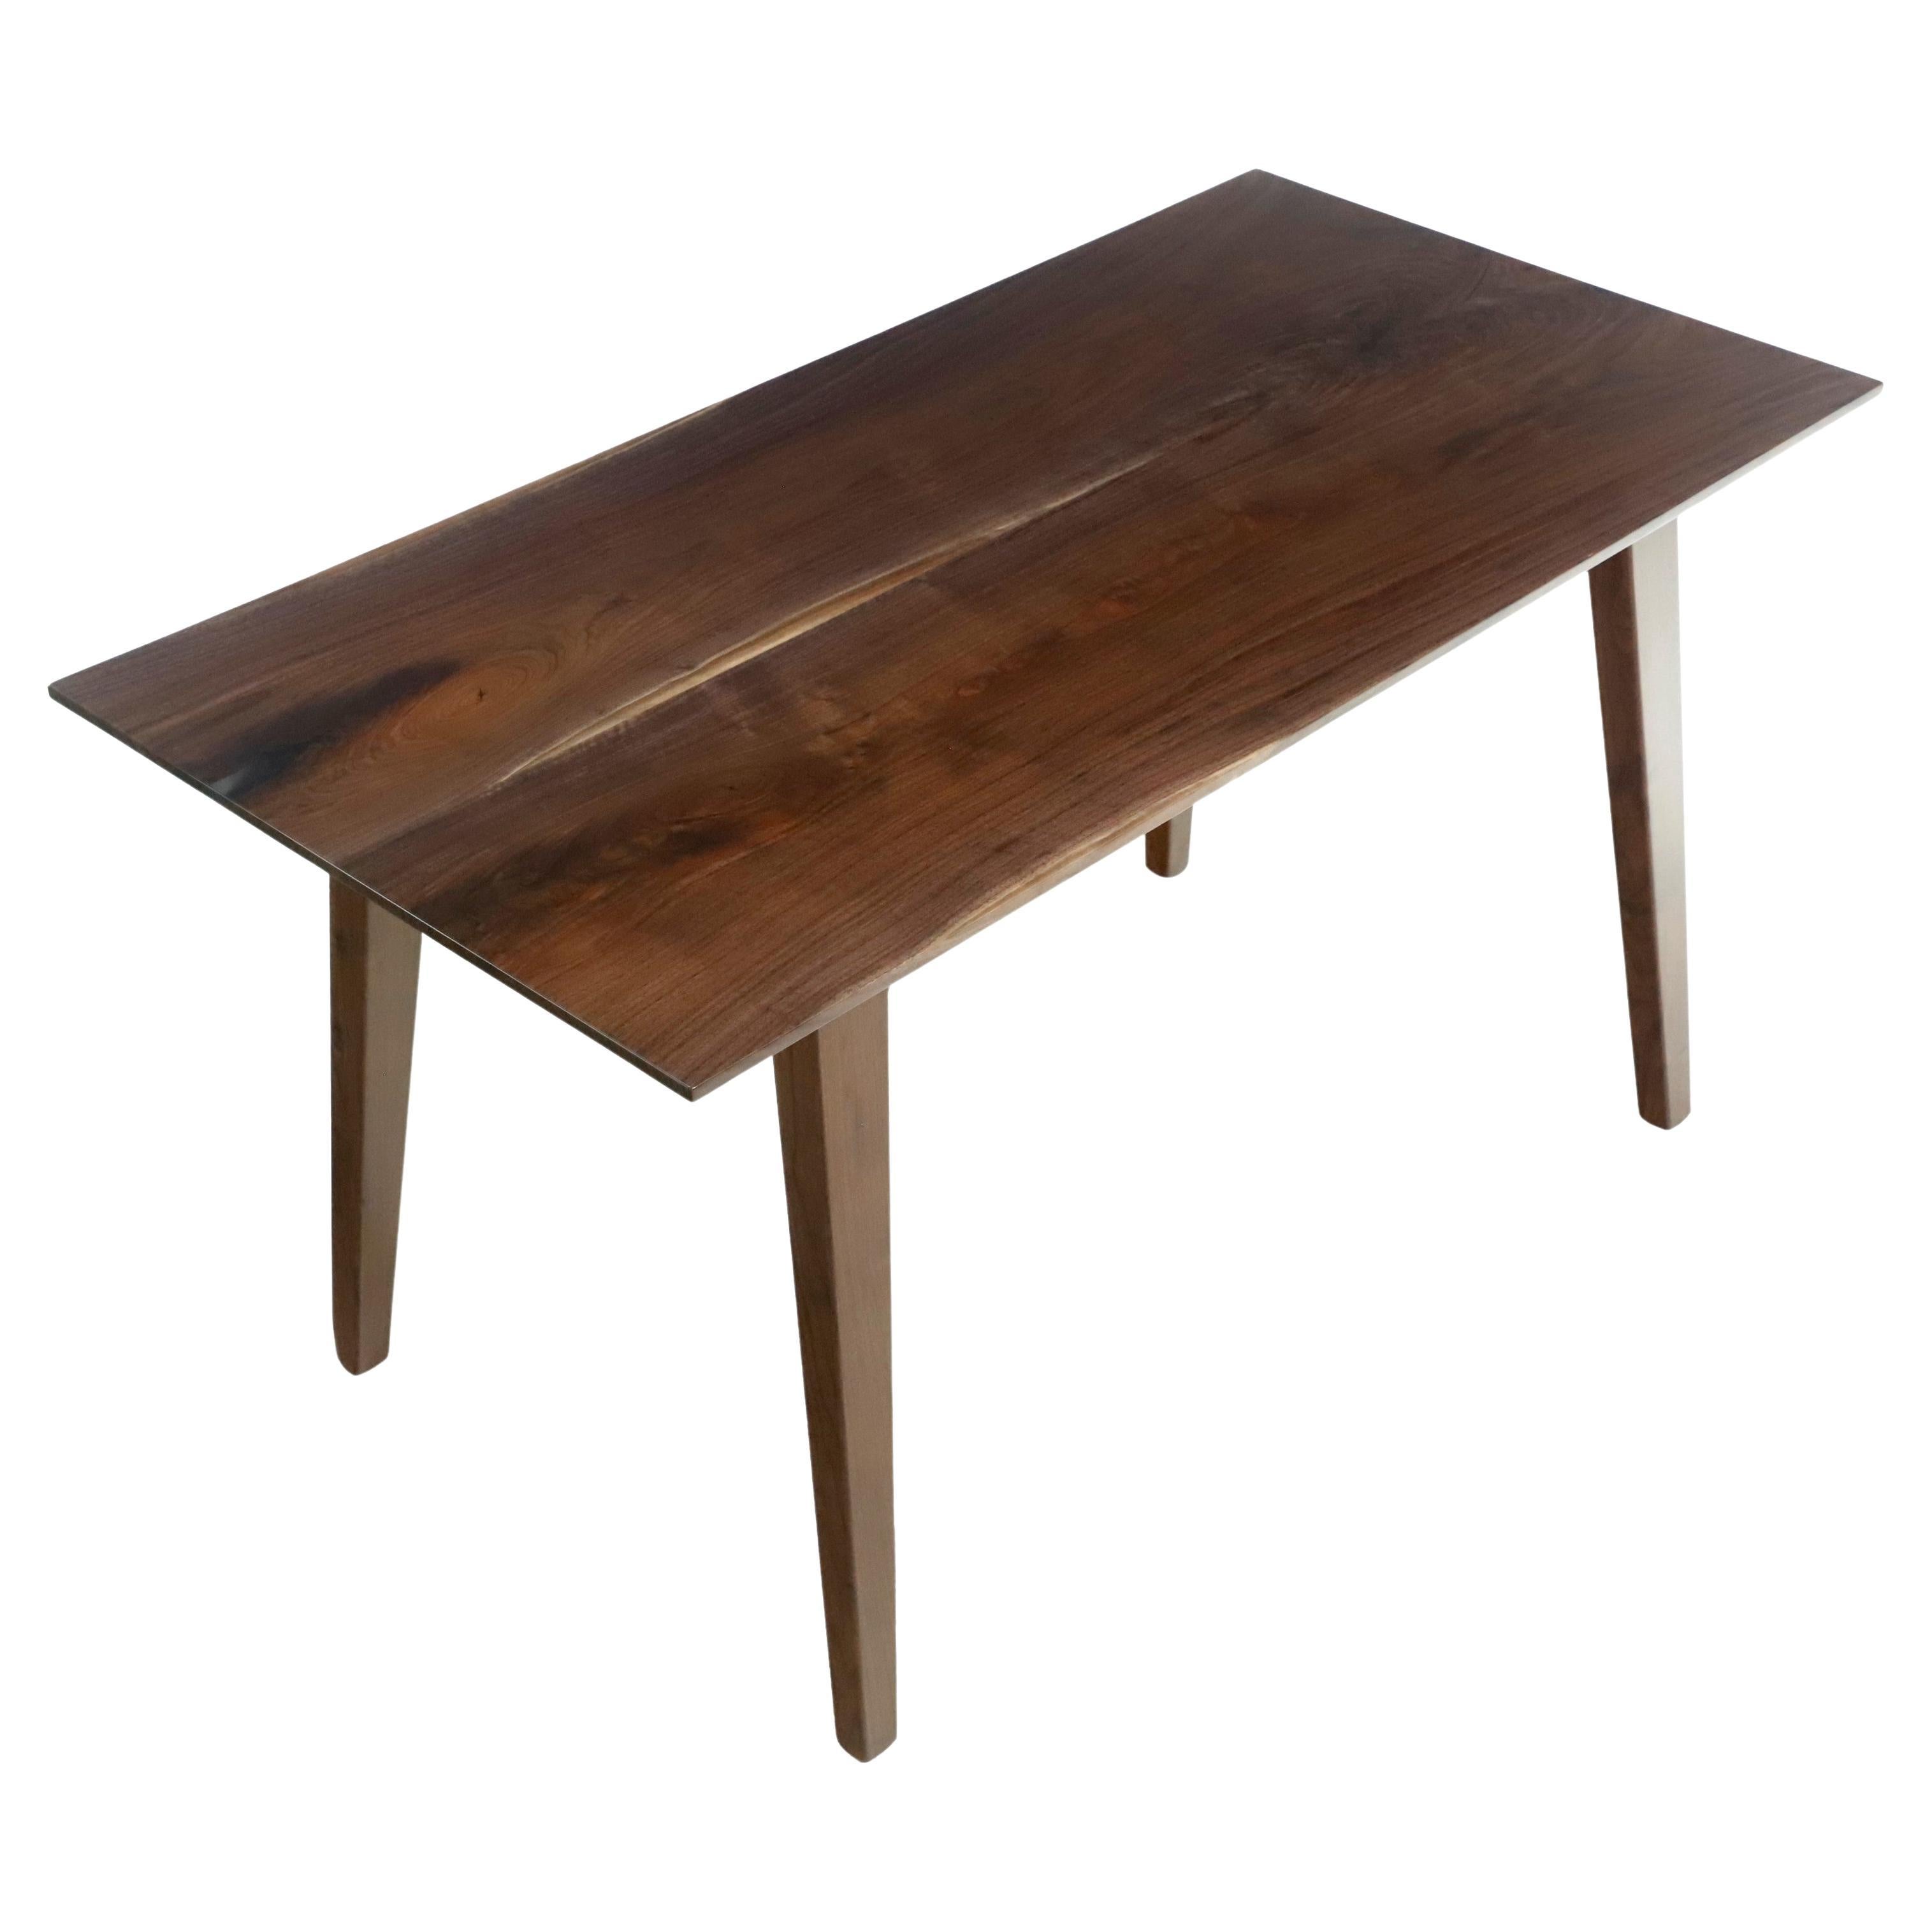 4.5 ft Solid Walnut Resin Detailed Tapered Leg Dining Table